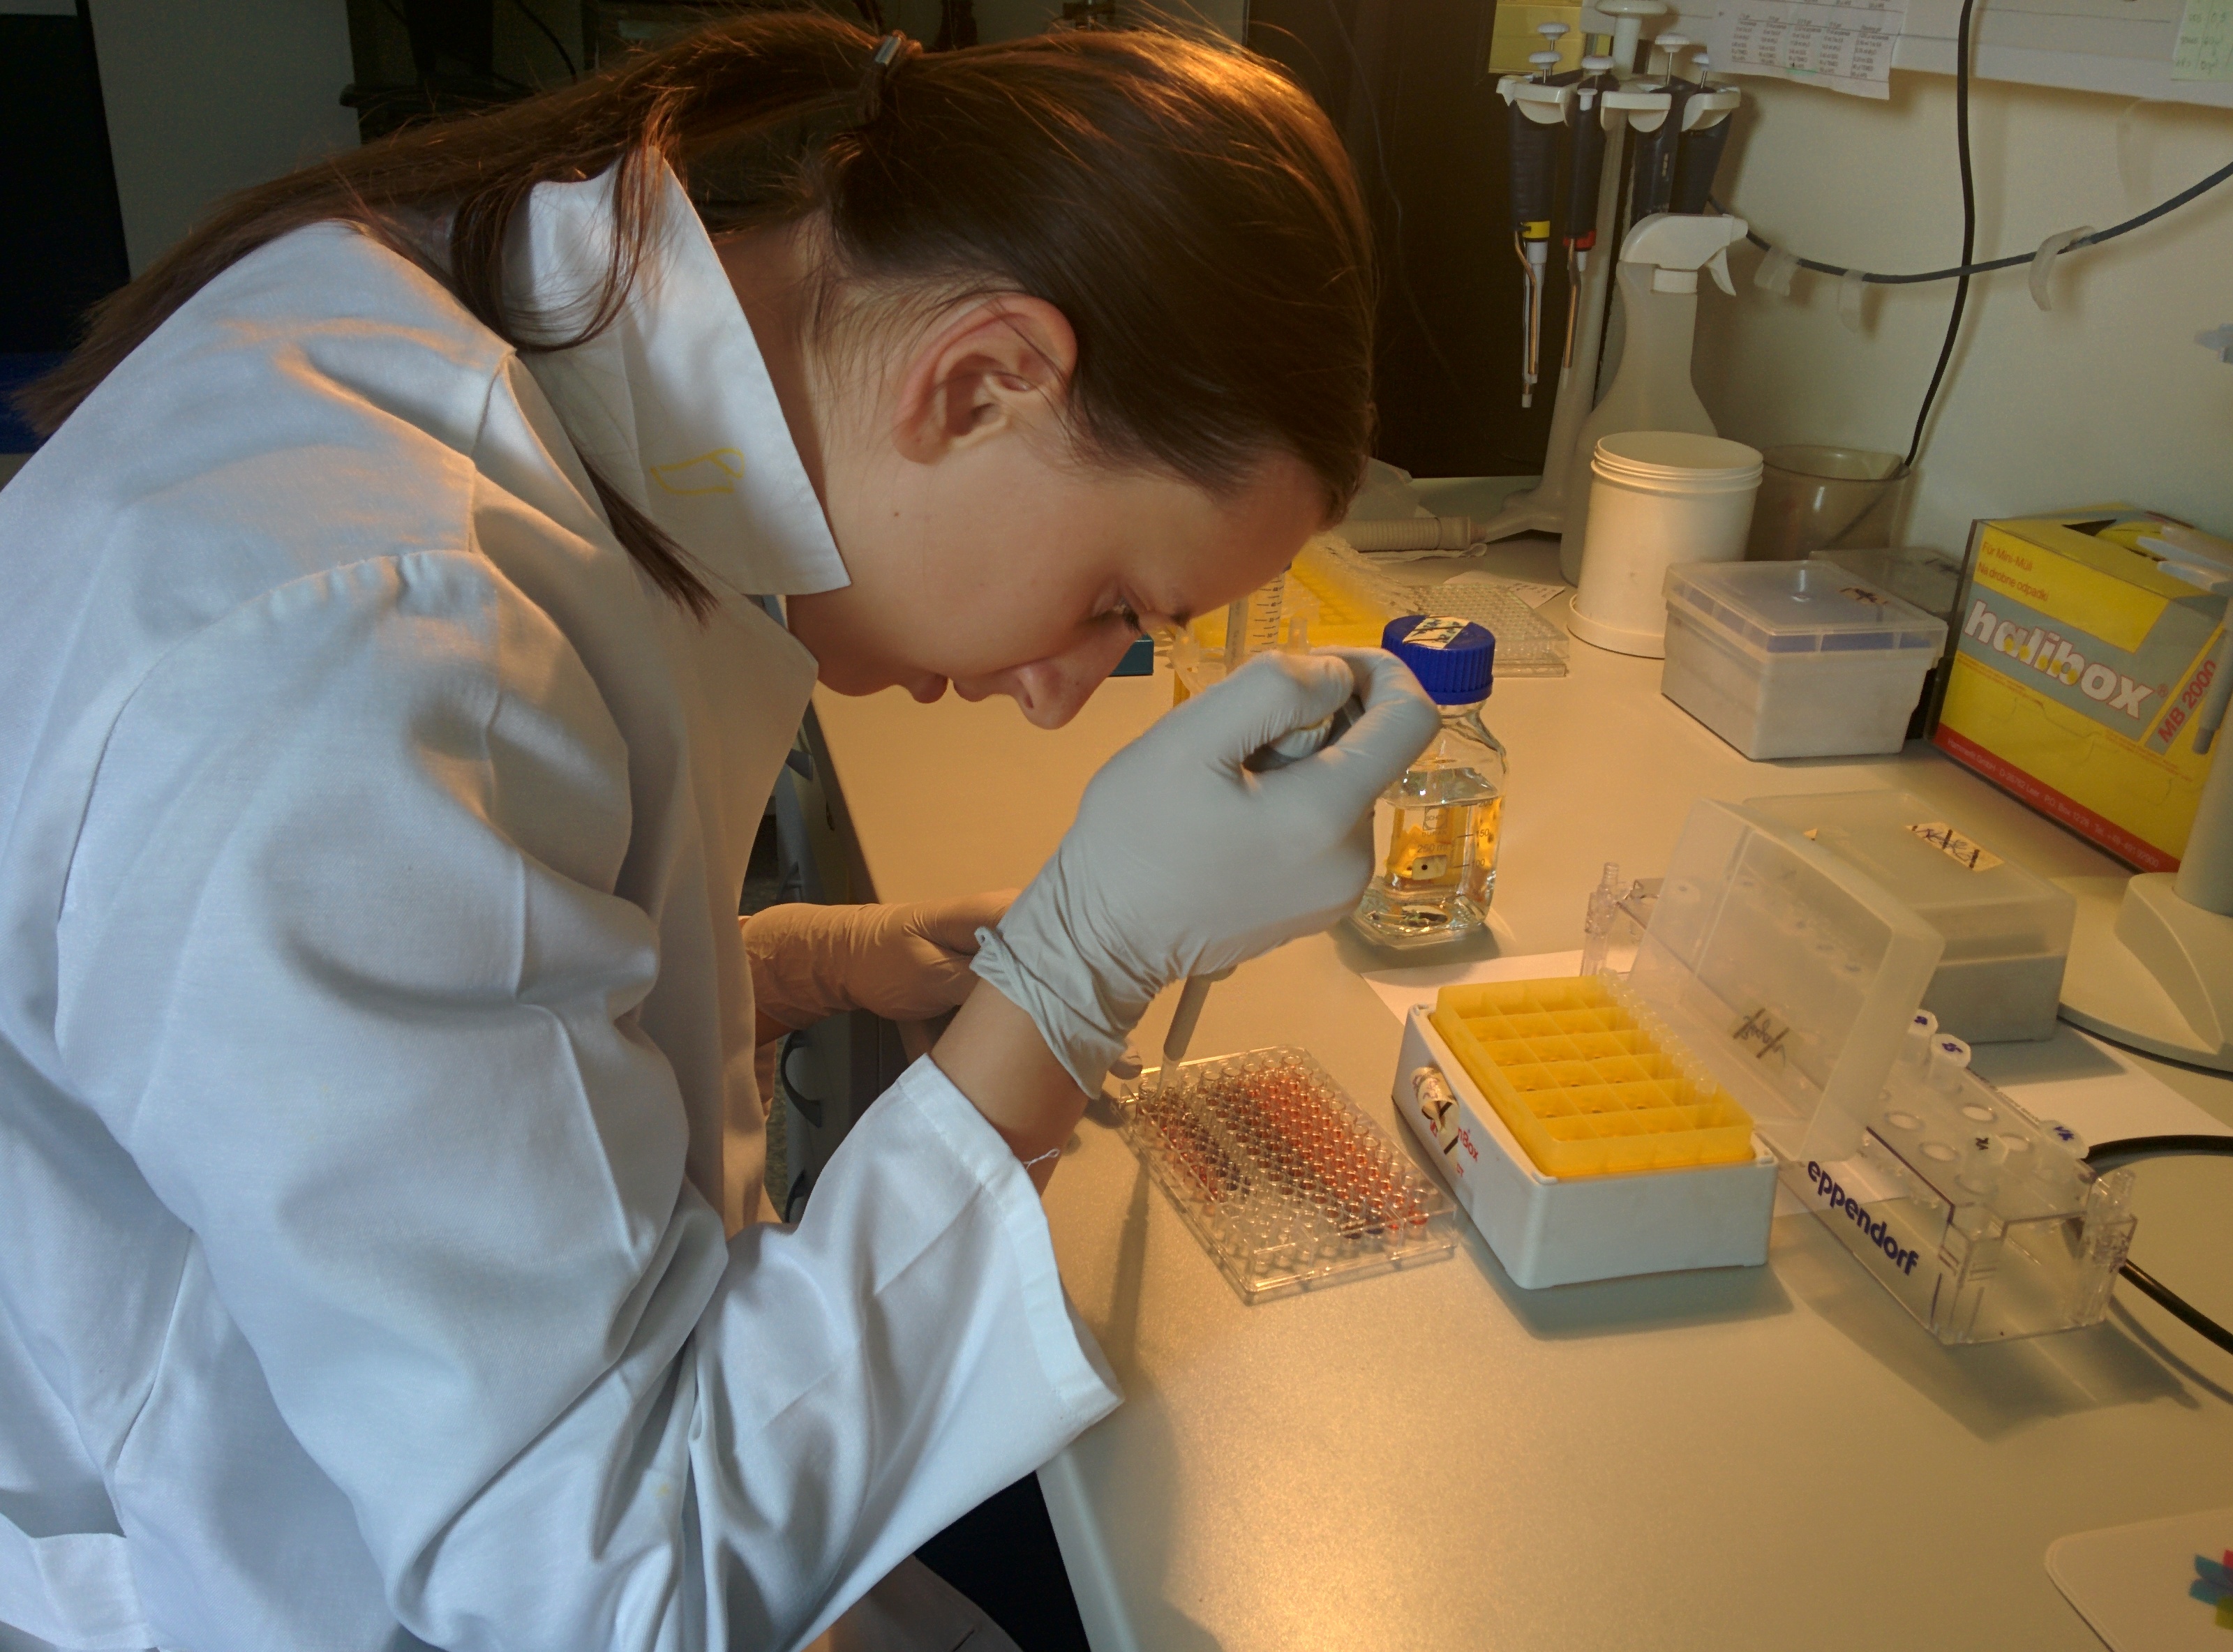 Picture 5: Measuring caspase activity - adding samples